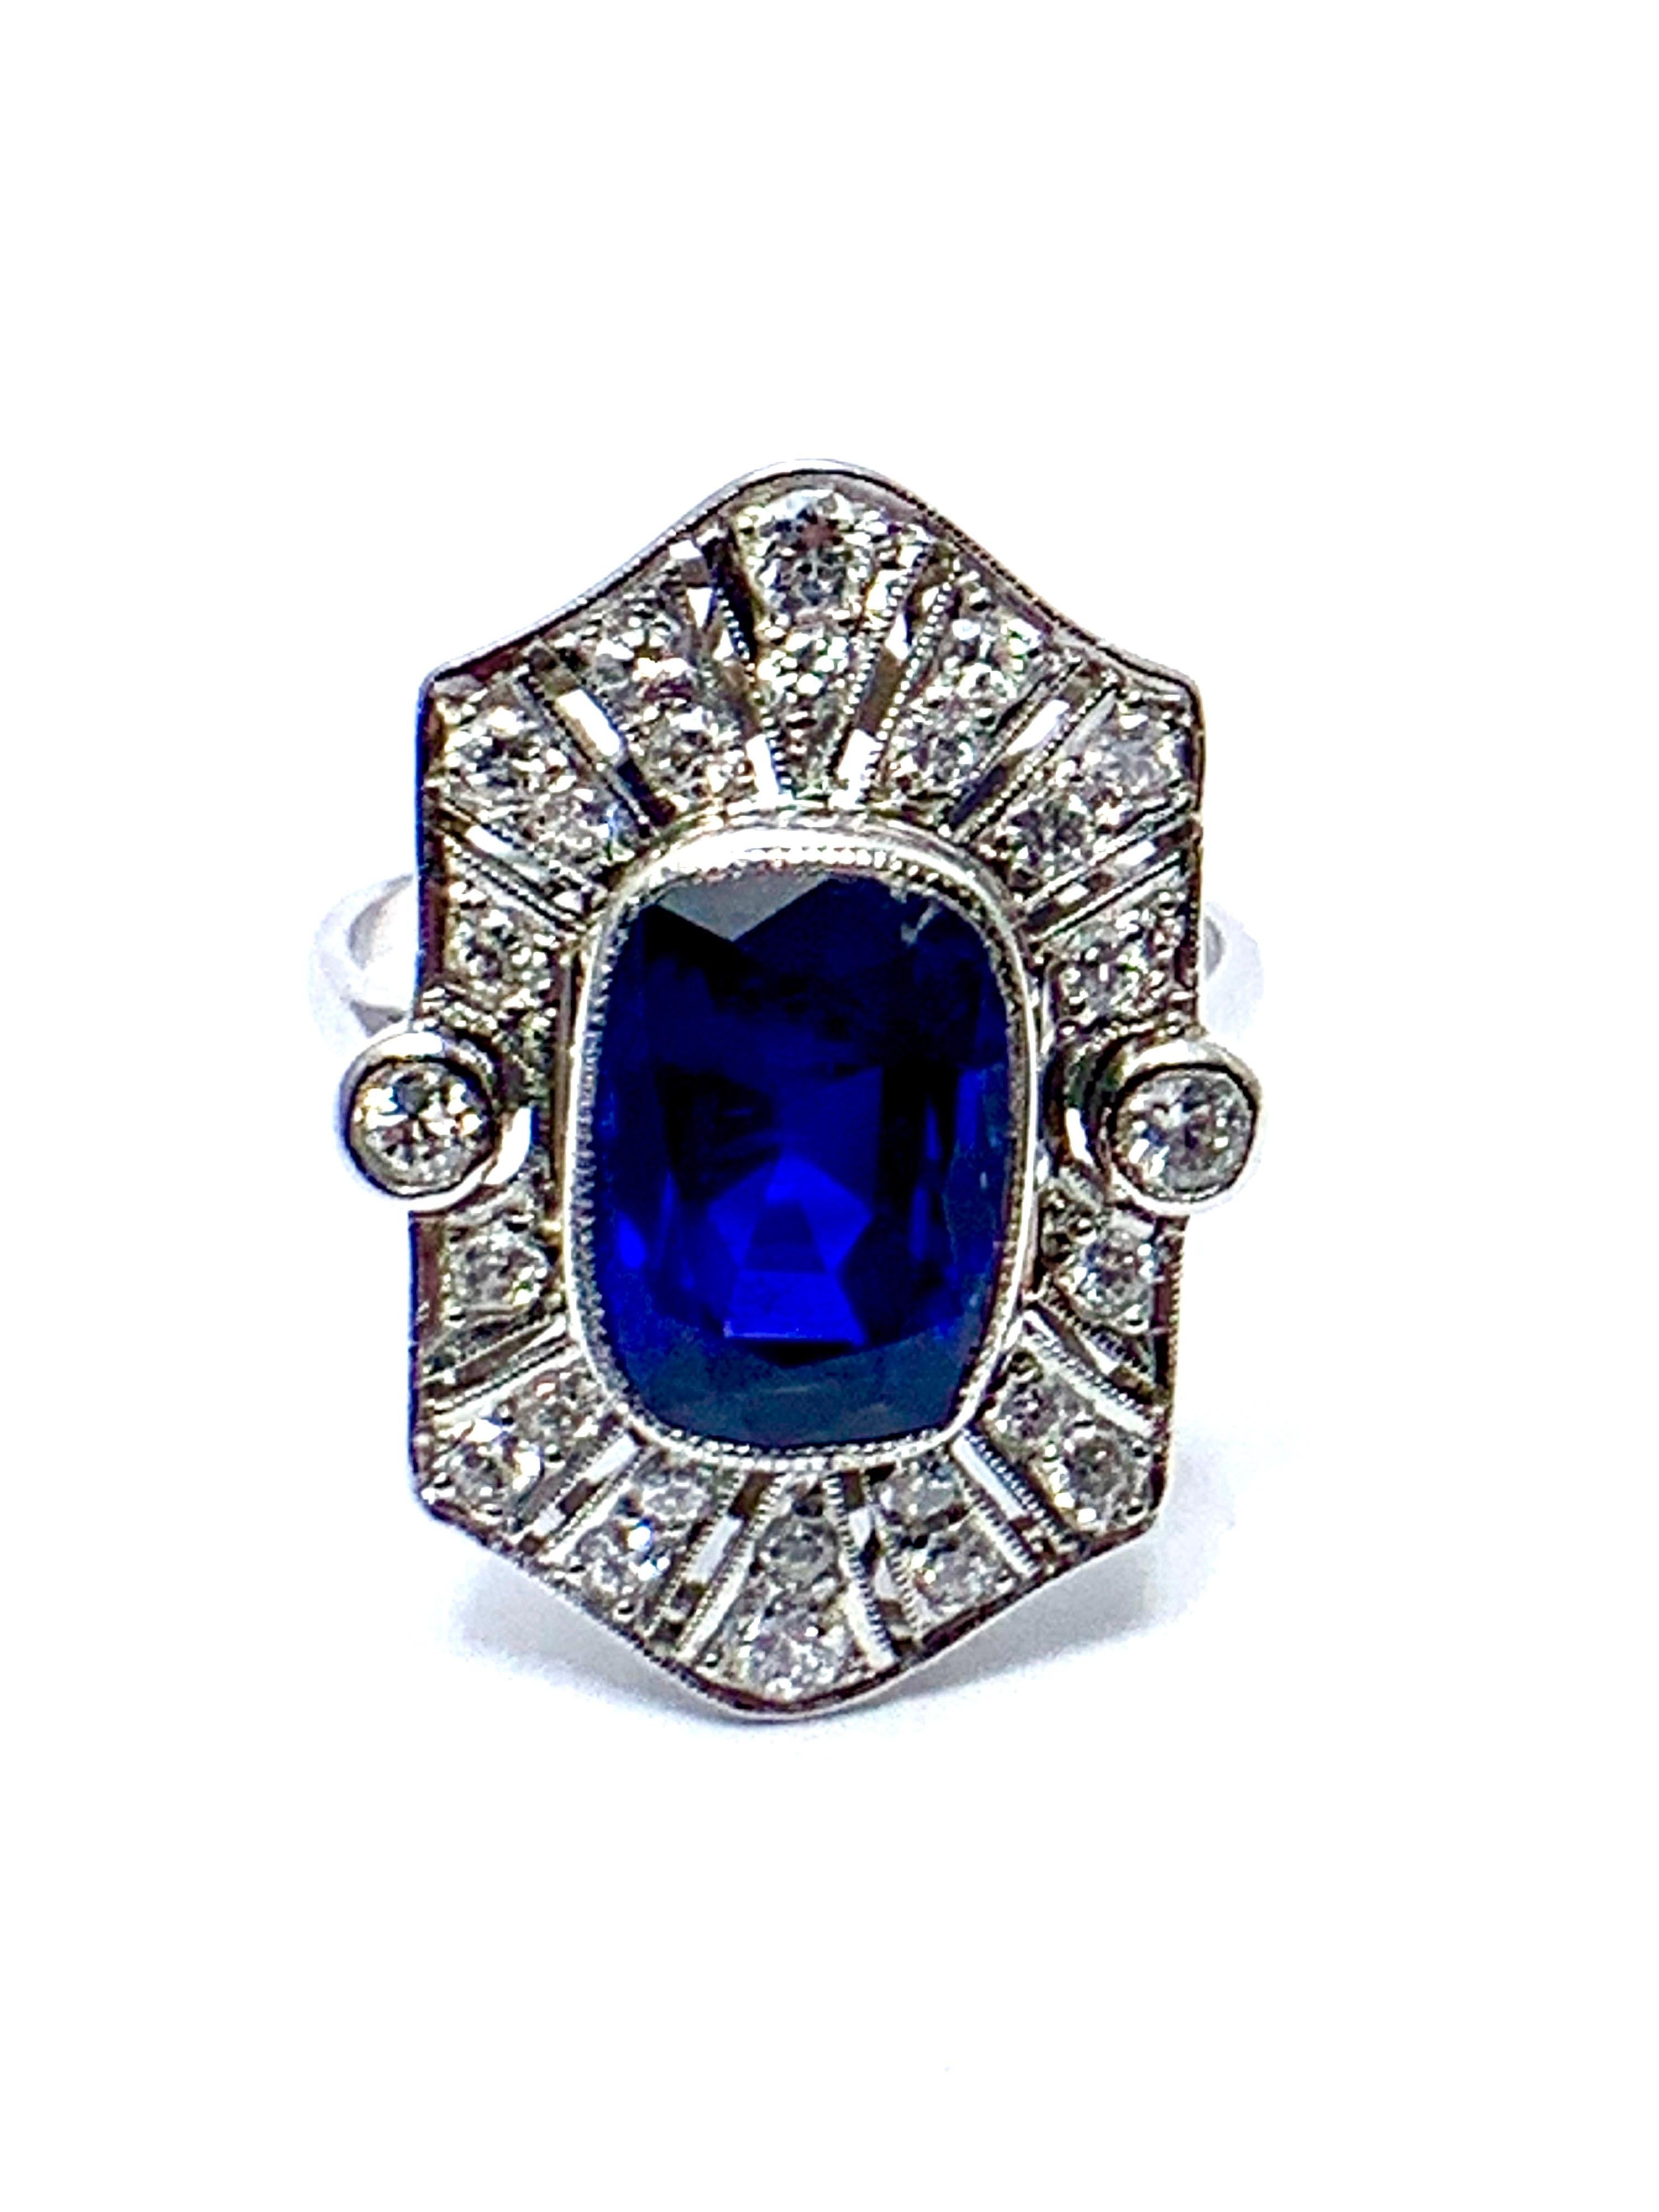 A stunning Art Deco Style Sapphire and Diamond platinum ring!  The 4.76 carat cushion shaped Sapphire is bezel set with a milgrain edge sitting atop a balanced dispersion of old European and single cut Diamonds that total 0.69 carats.  The sapphire